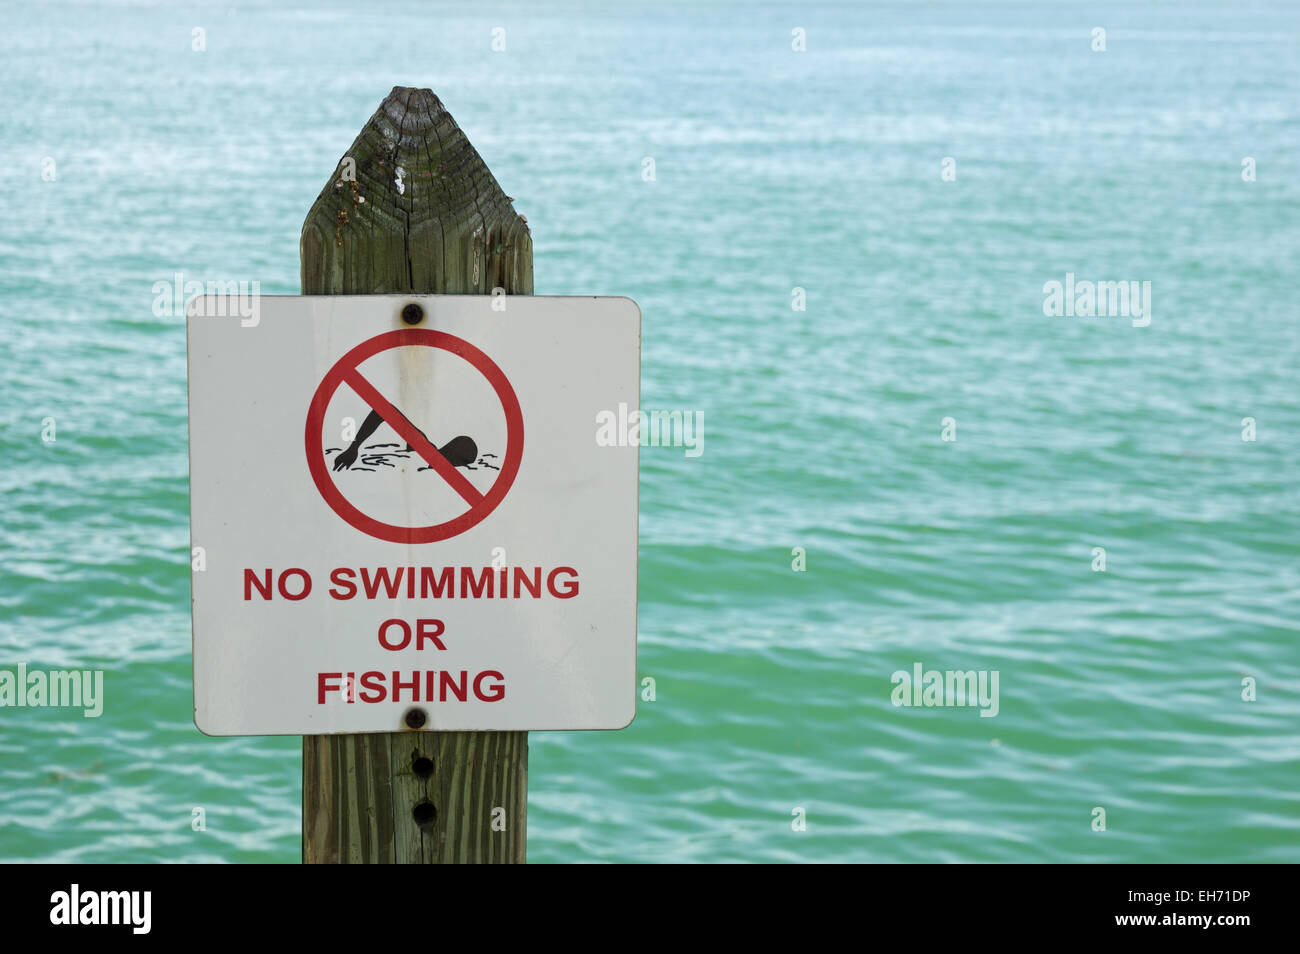 no swimming or fishing sign on a post with out of focus water behind it Stock Photo